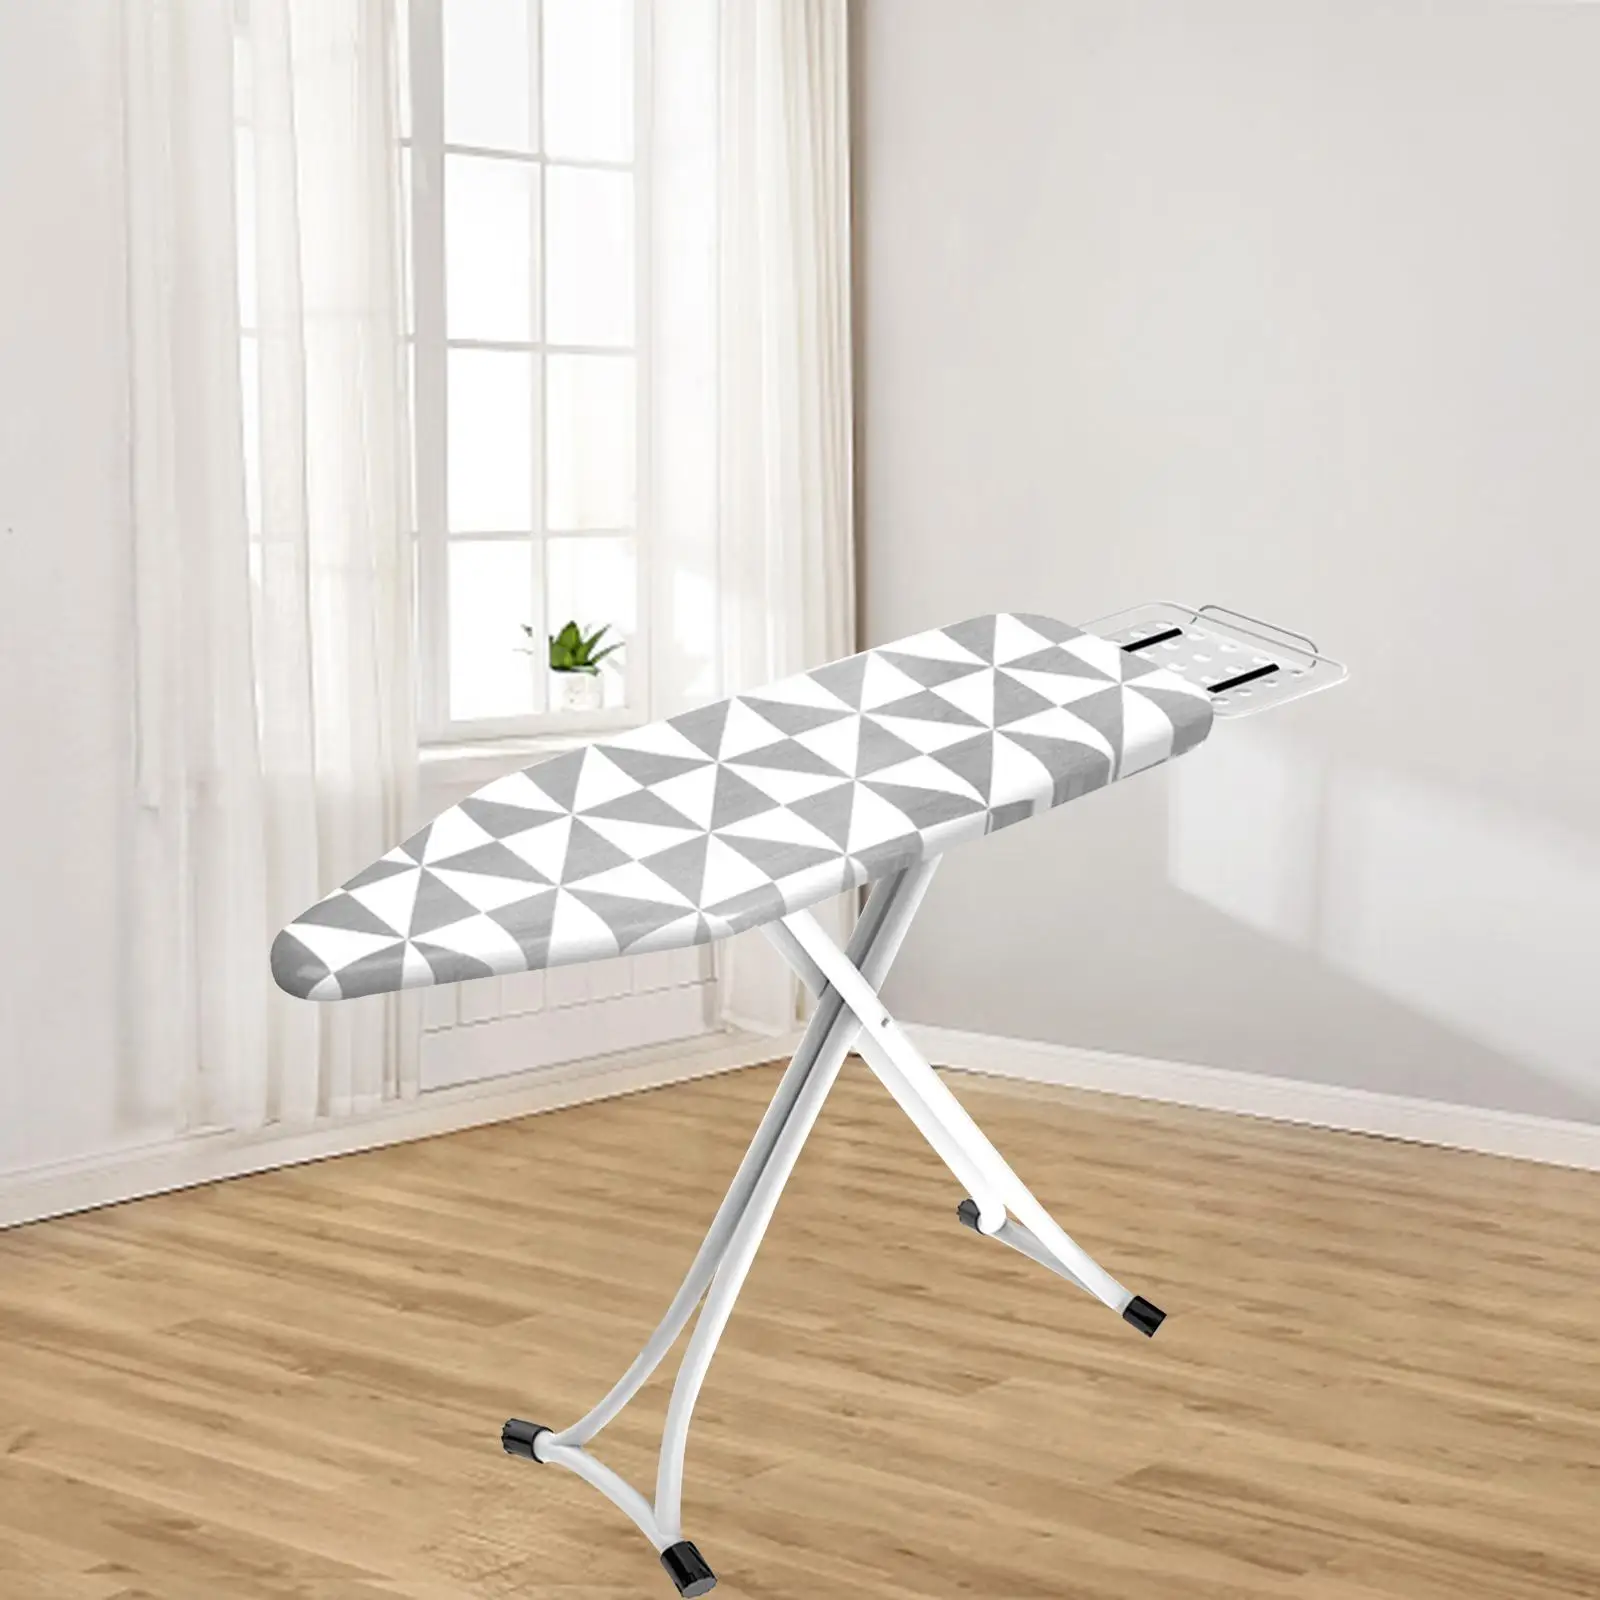 Cotton Ironing Board Cover 120Cmx41cm Stain Resistant Blanket Pad Heat Insulation Ironing Table Cover Protector Laundry Supplies